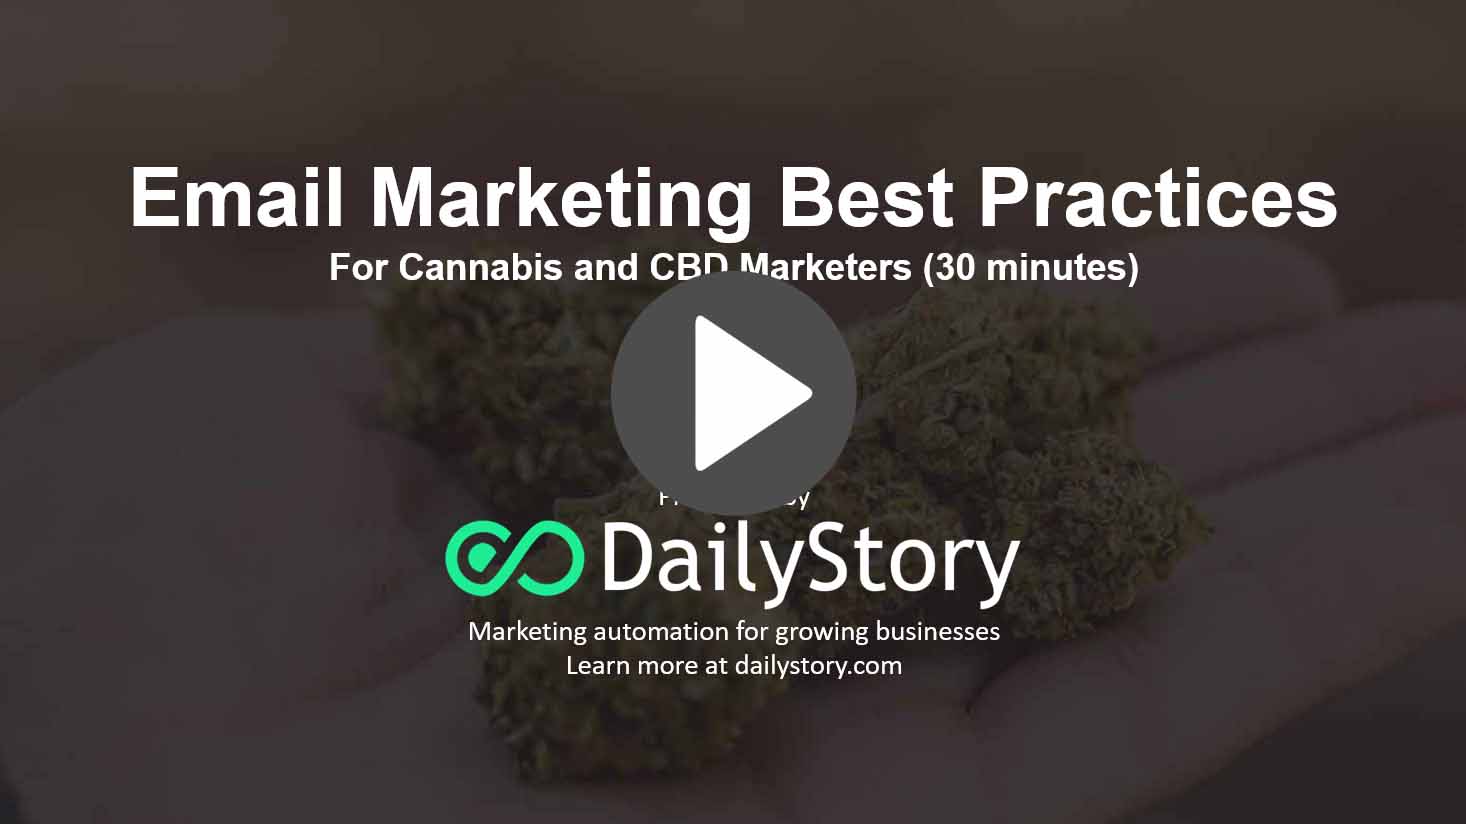 Webinar: Email Marketing Best Practices for Cannabis and CBD Marketers